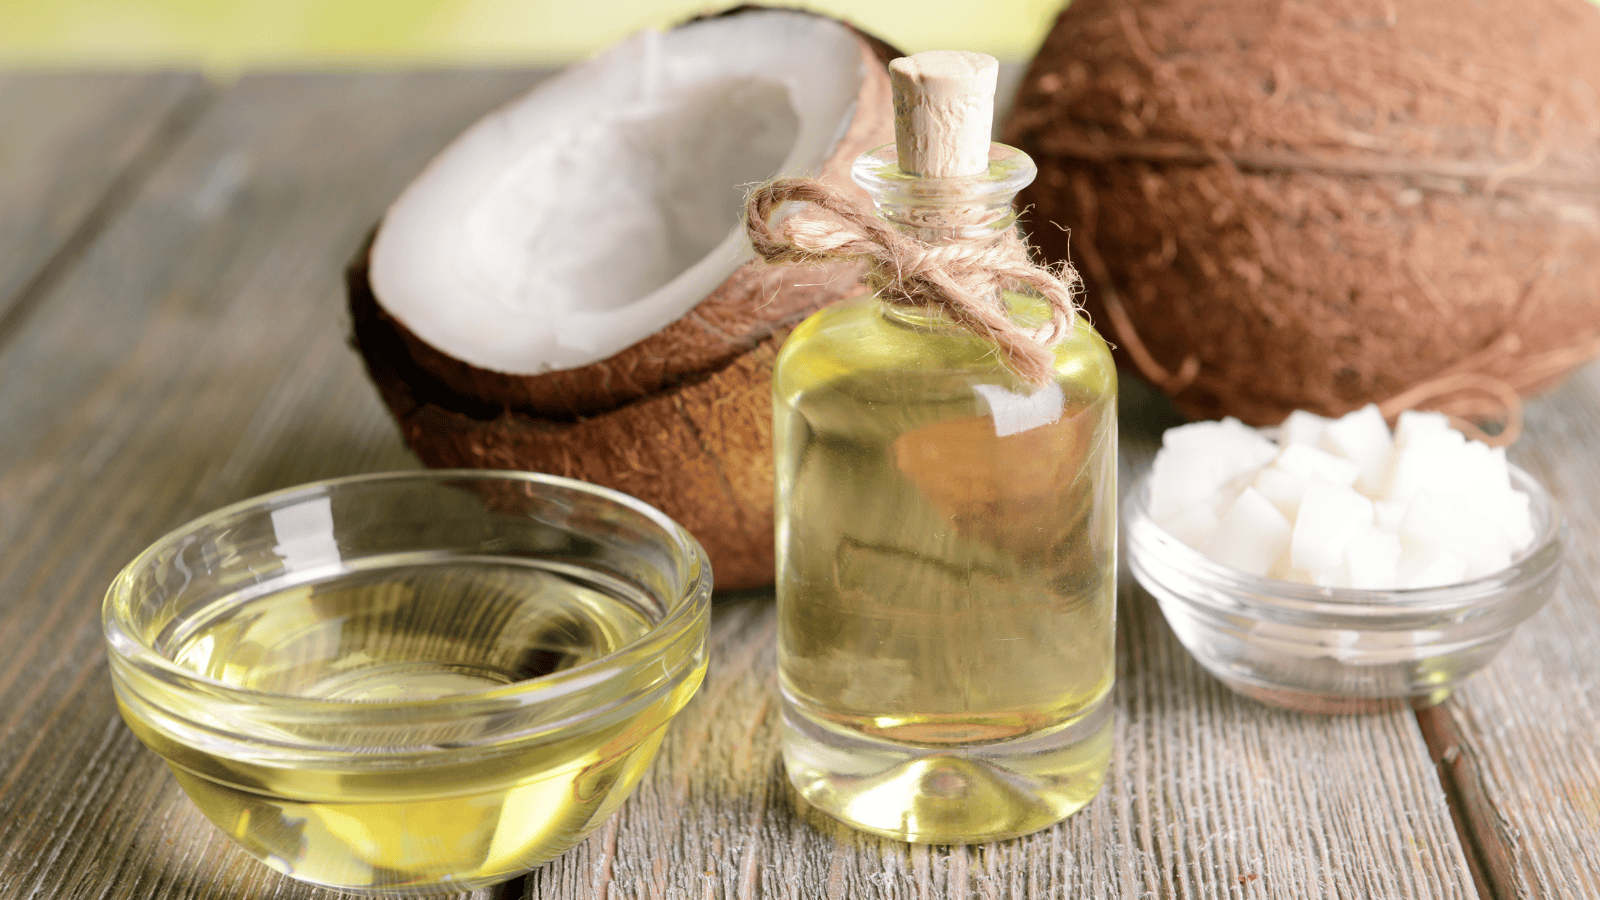 DIY anti-aging products